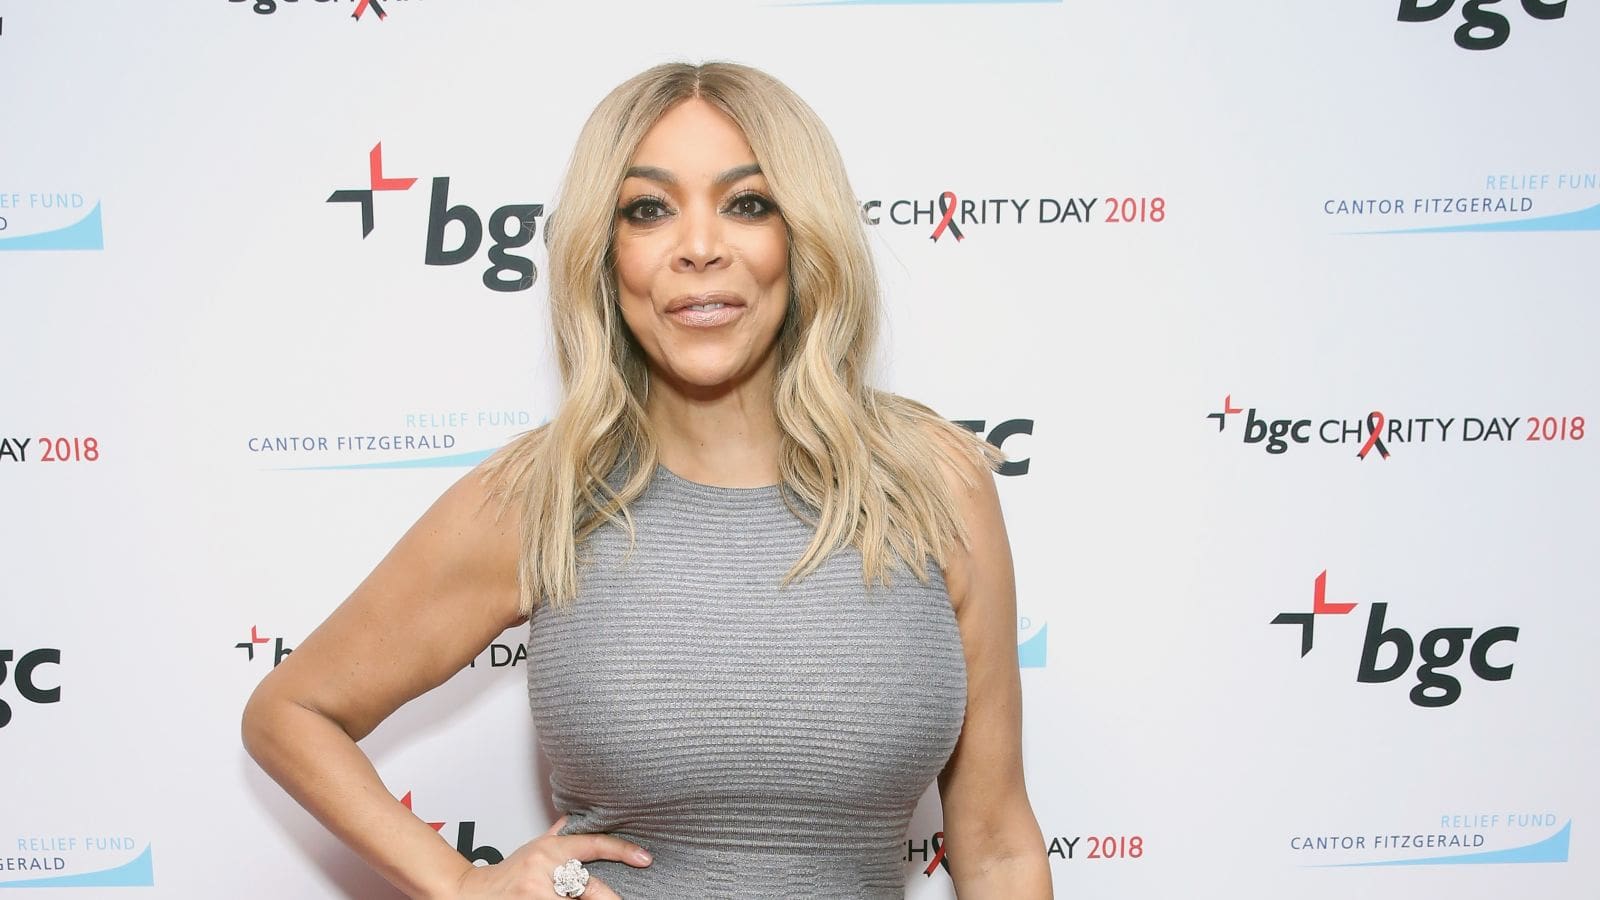 Wendy Williams' Latest Pics From Kandi Burruss' Racy Show Have Fans Saying That She's Out There 'Hunting For Some Young Prey'